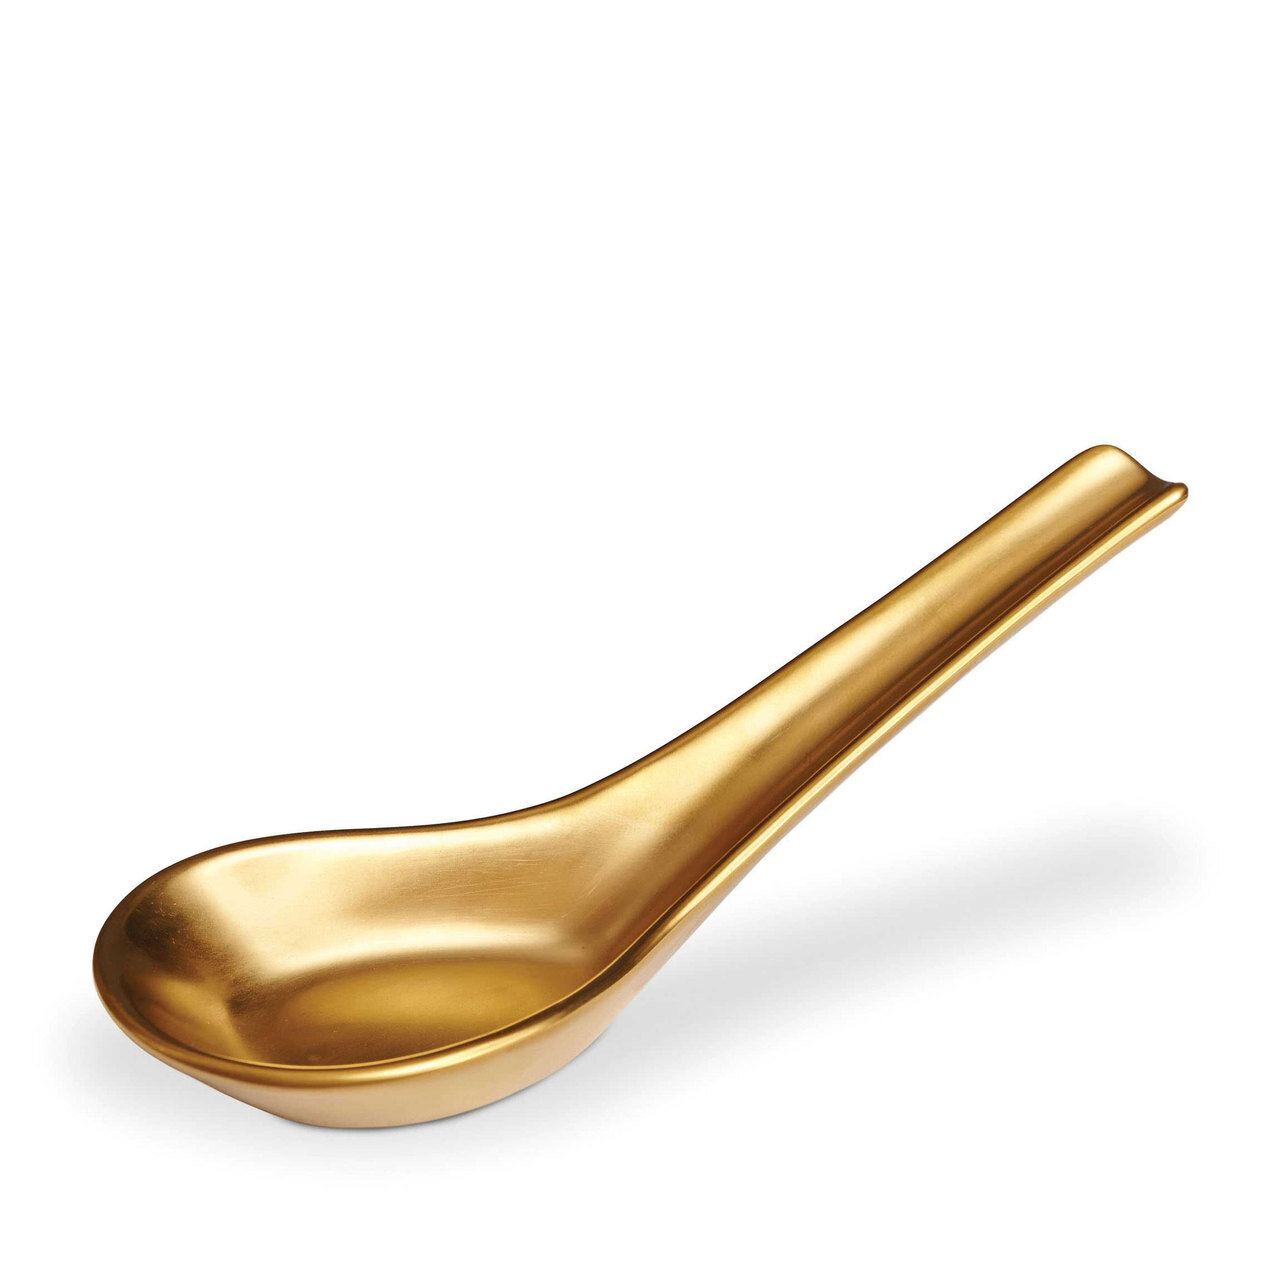 L'Objet Han Chinese Spoon Gold Gold